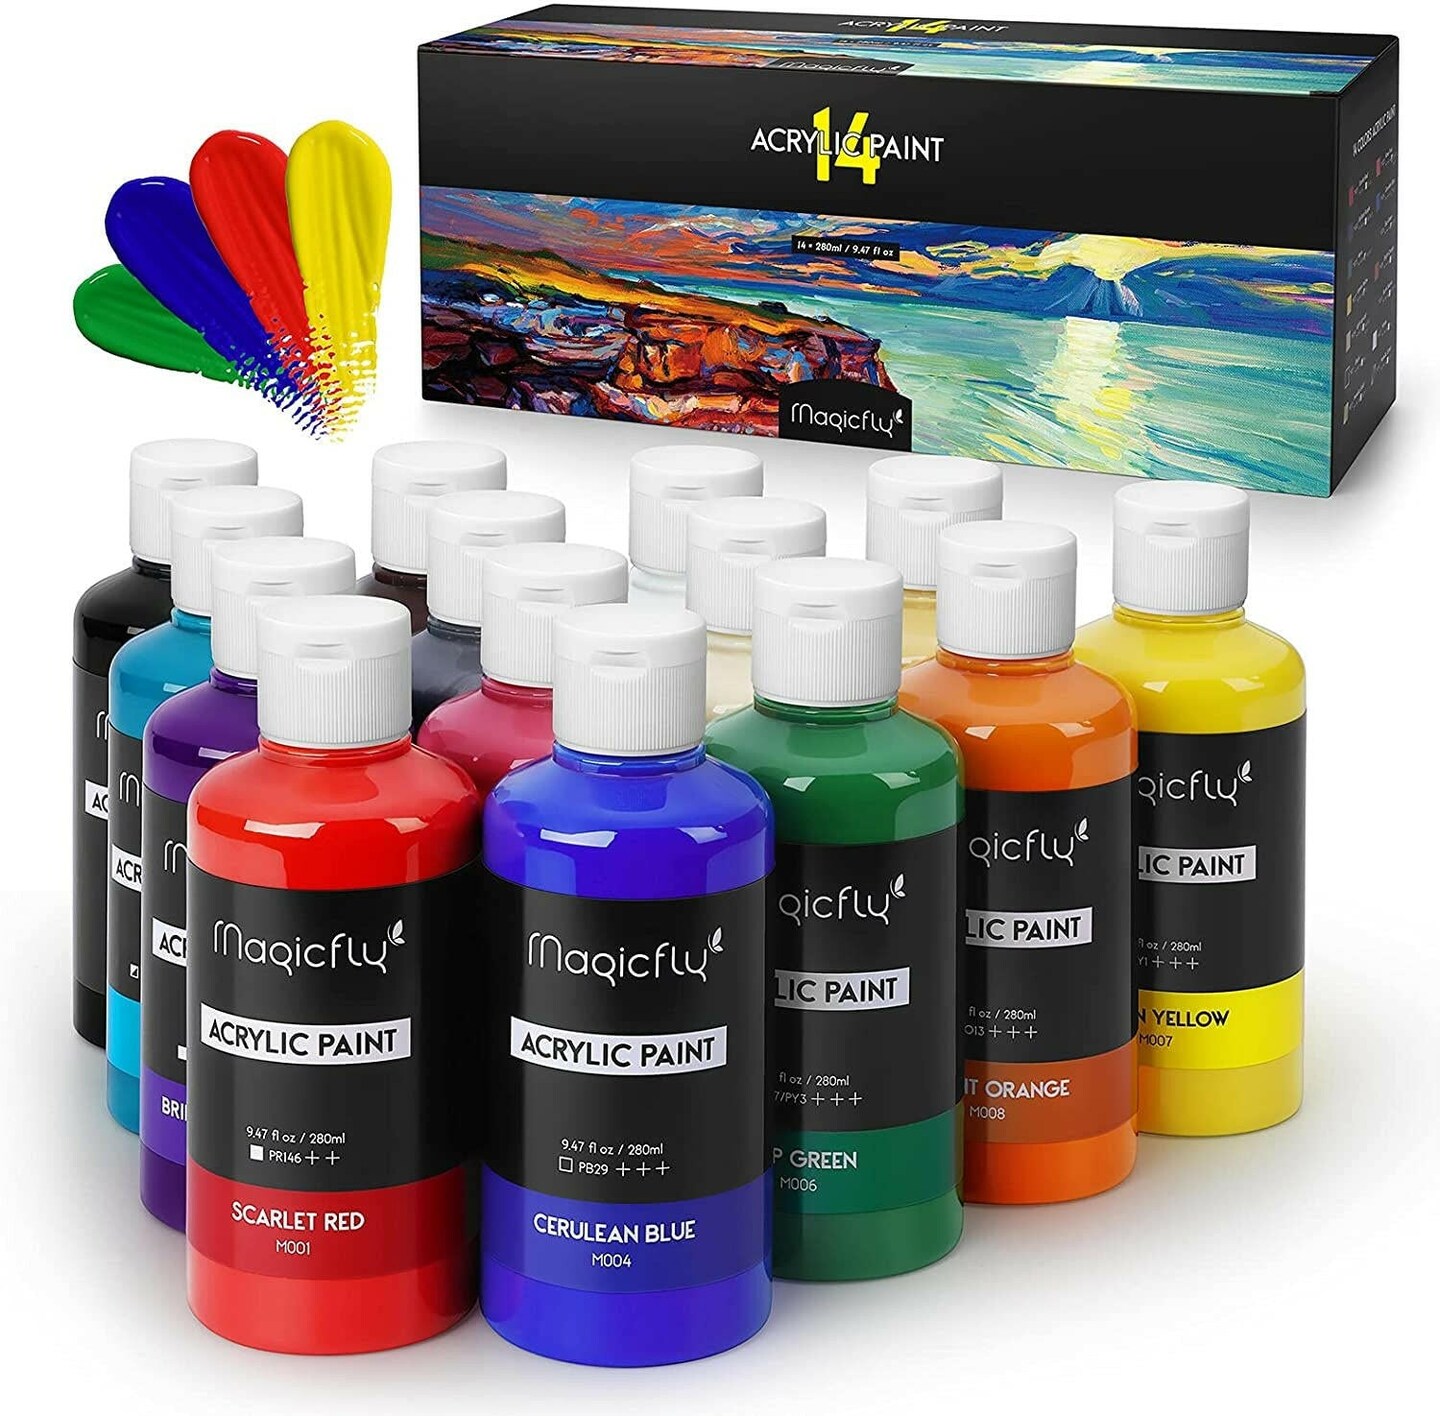 Bulk Acrylic Paint Set, 14 Rich Pigments Colors. Acrylic Paint Bottles,  Non-Fading, Non-Toxic Craft Paints for Painting on Canvas, Halloween  Pumpkins, Ideal for Beginners, Artist & Hobby Painters